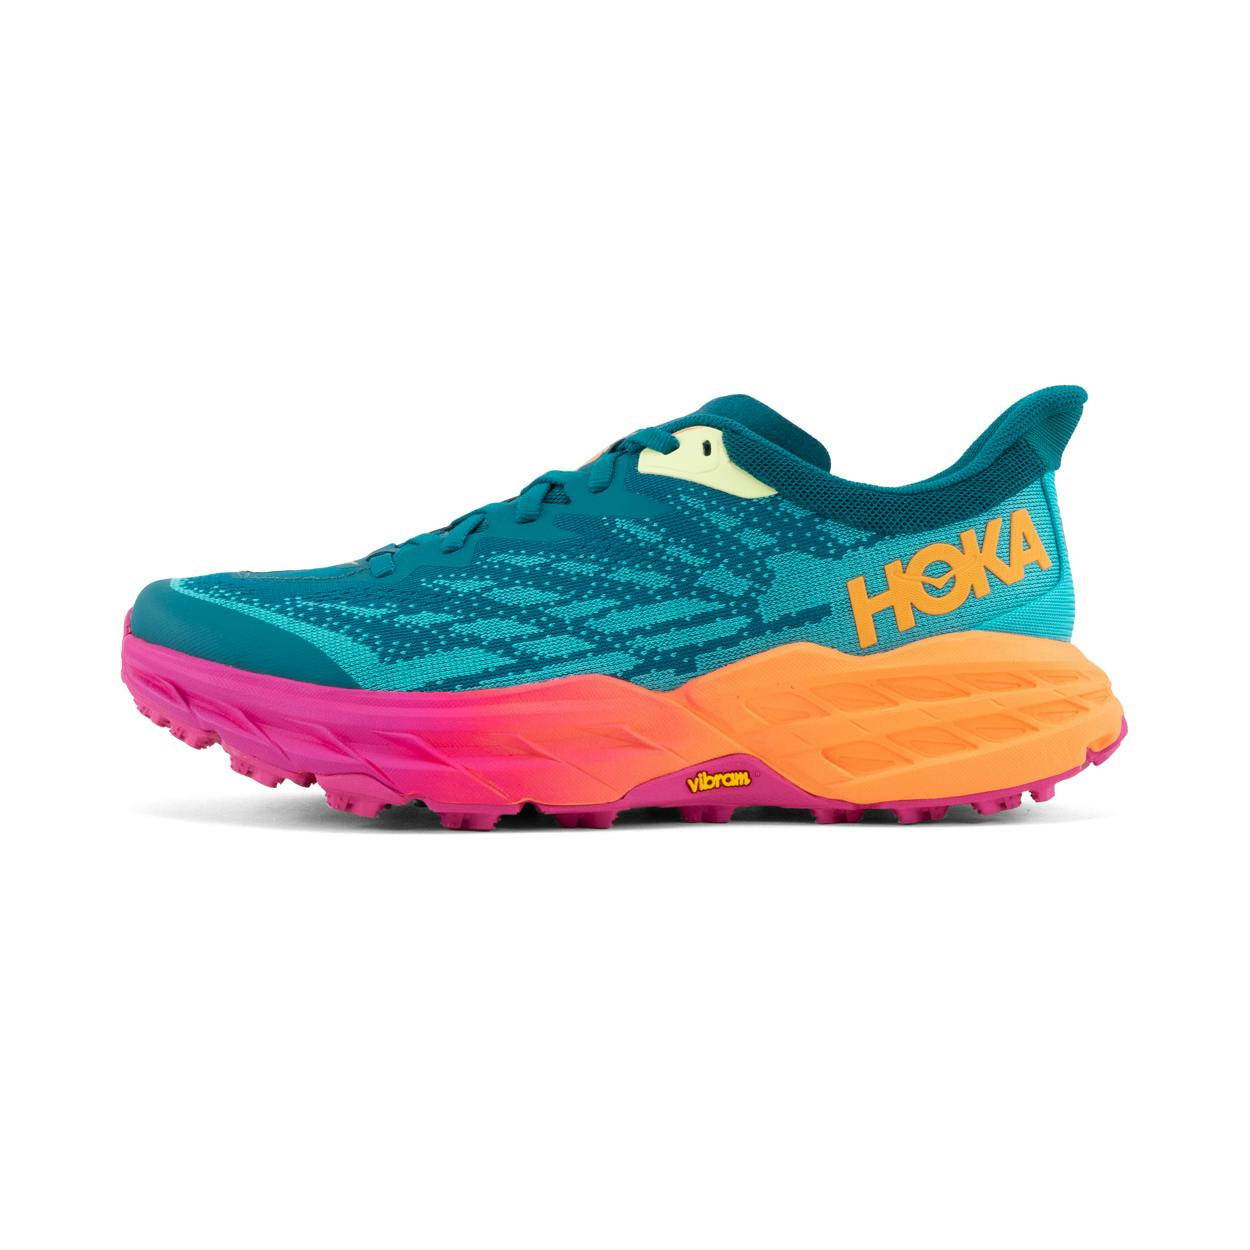 Hoka Speedgoat Review: A Technical Trail Shoe That's Perfect For All ...